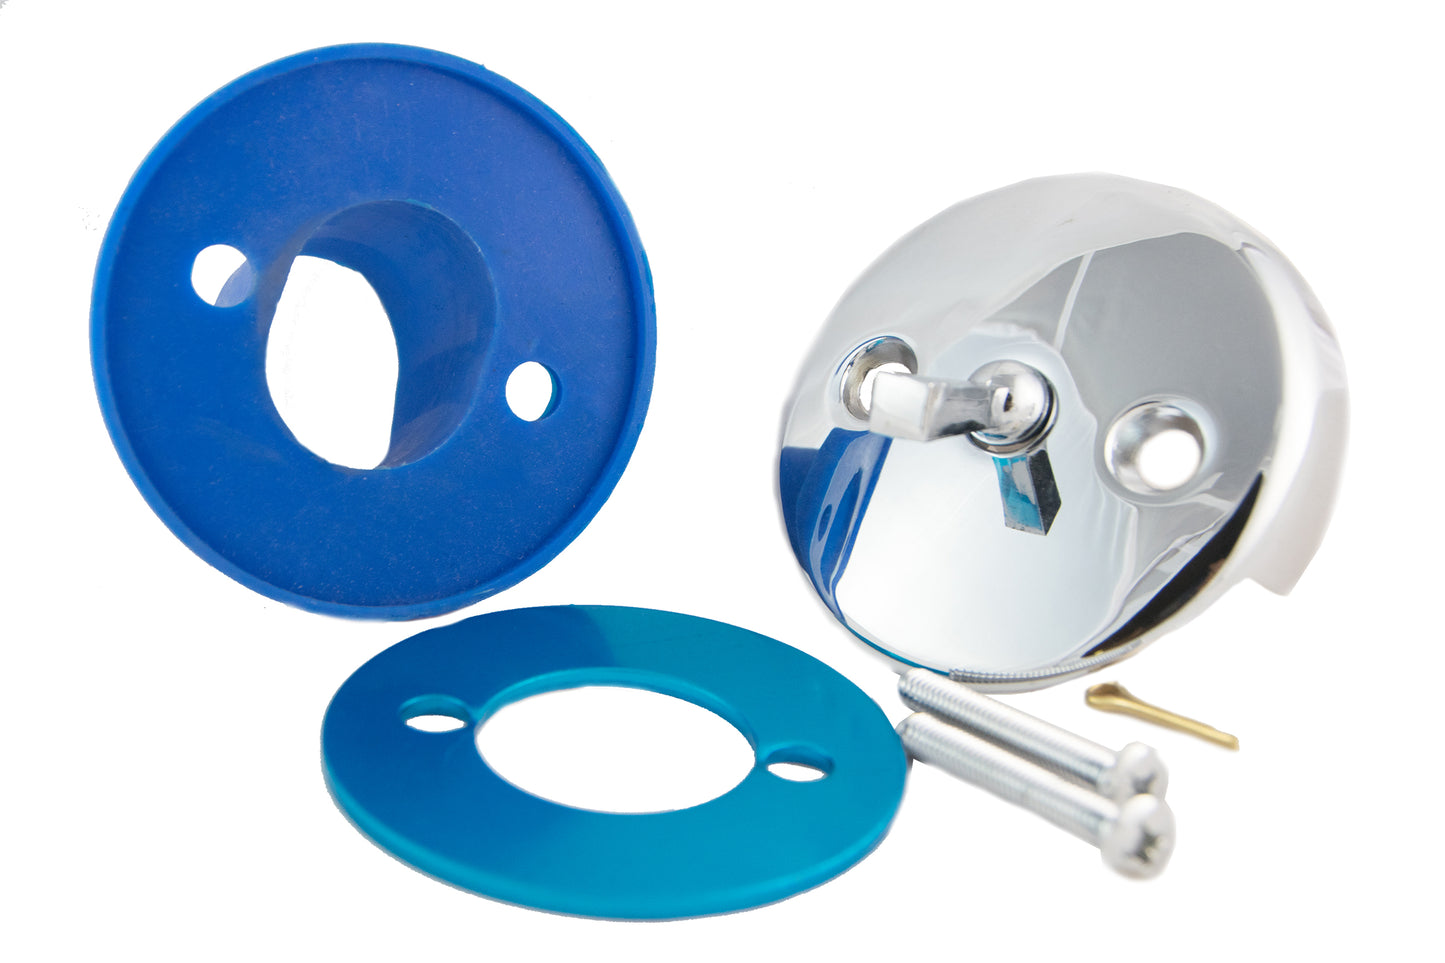 BIG Overflow Gasket Kit with Trip Lever Cover